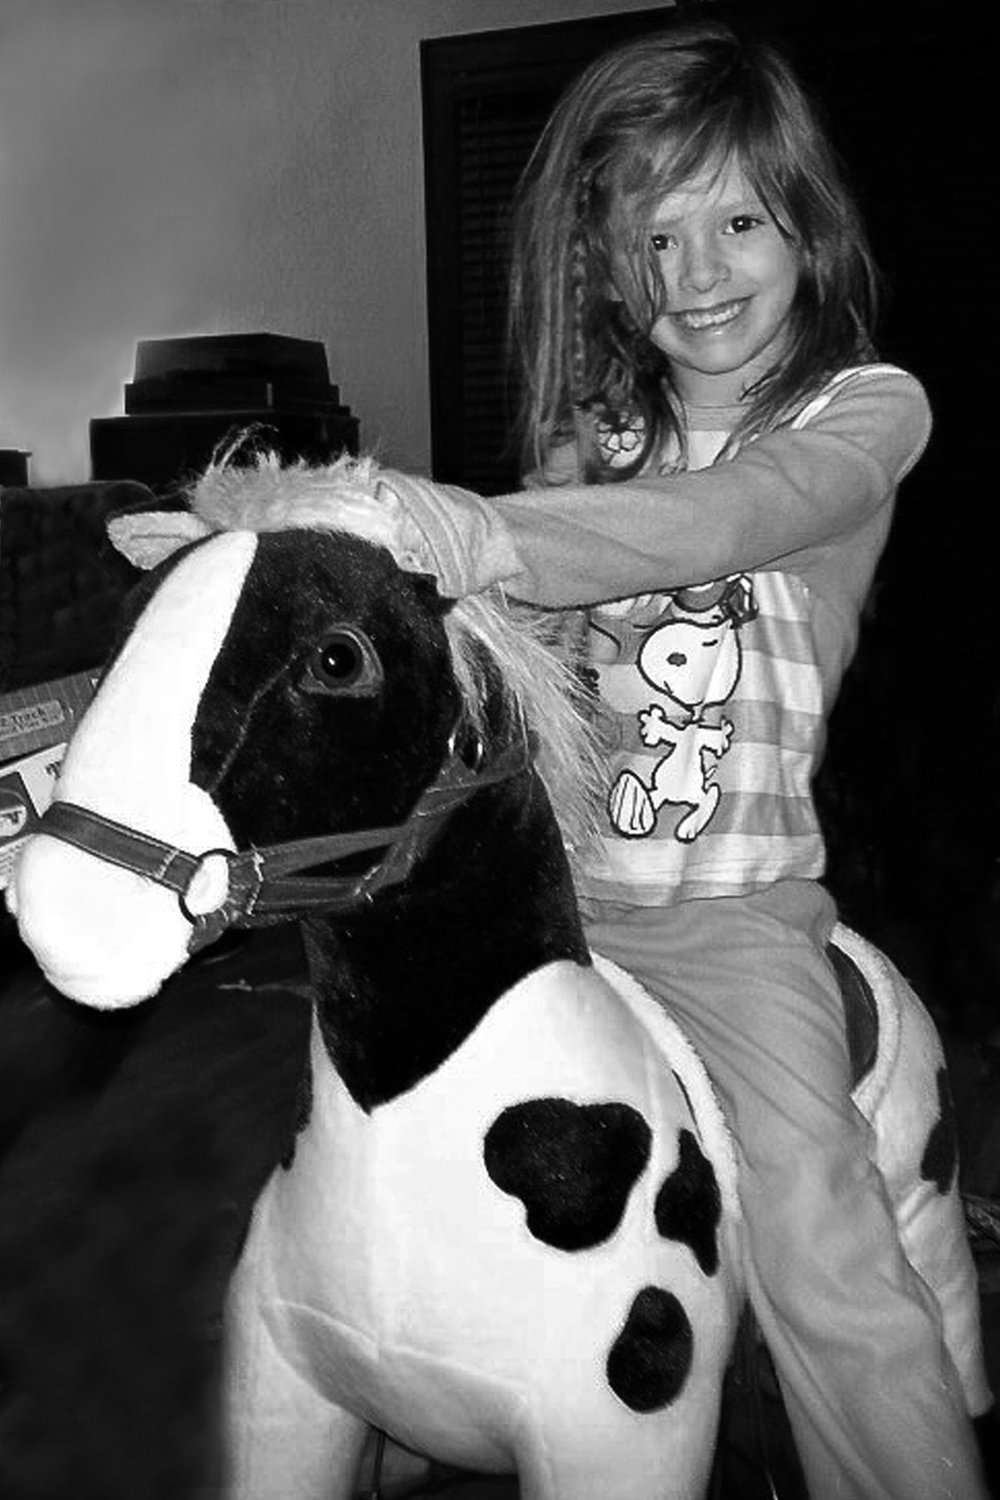 Erin Pavlica’s daughter in 2013, riding the used upholstered horse that became the inspiration for the Midway-Frogtown Exchange. The group offers a place for Midway and Frogtown neighbors to buy, share and barter. (Photo submitted)